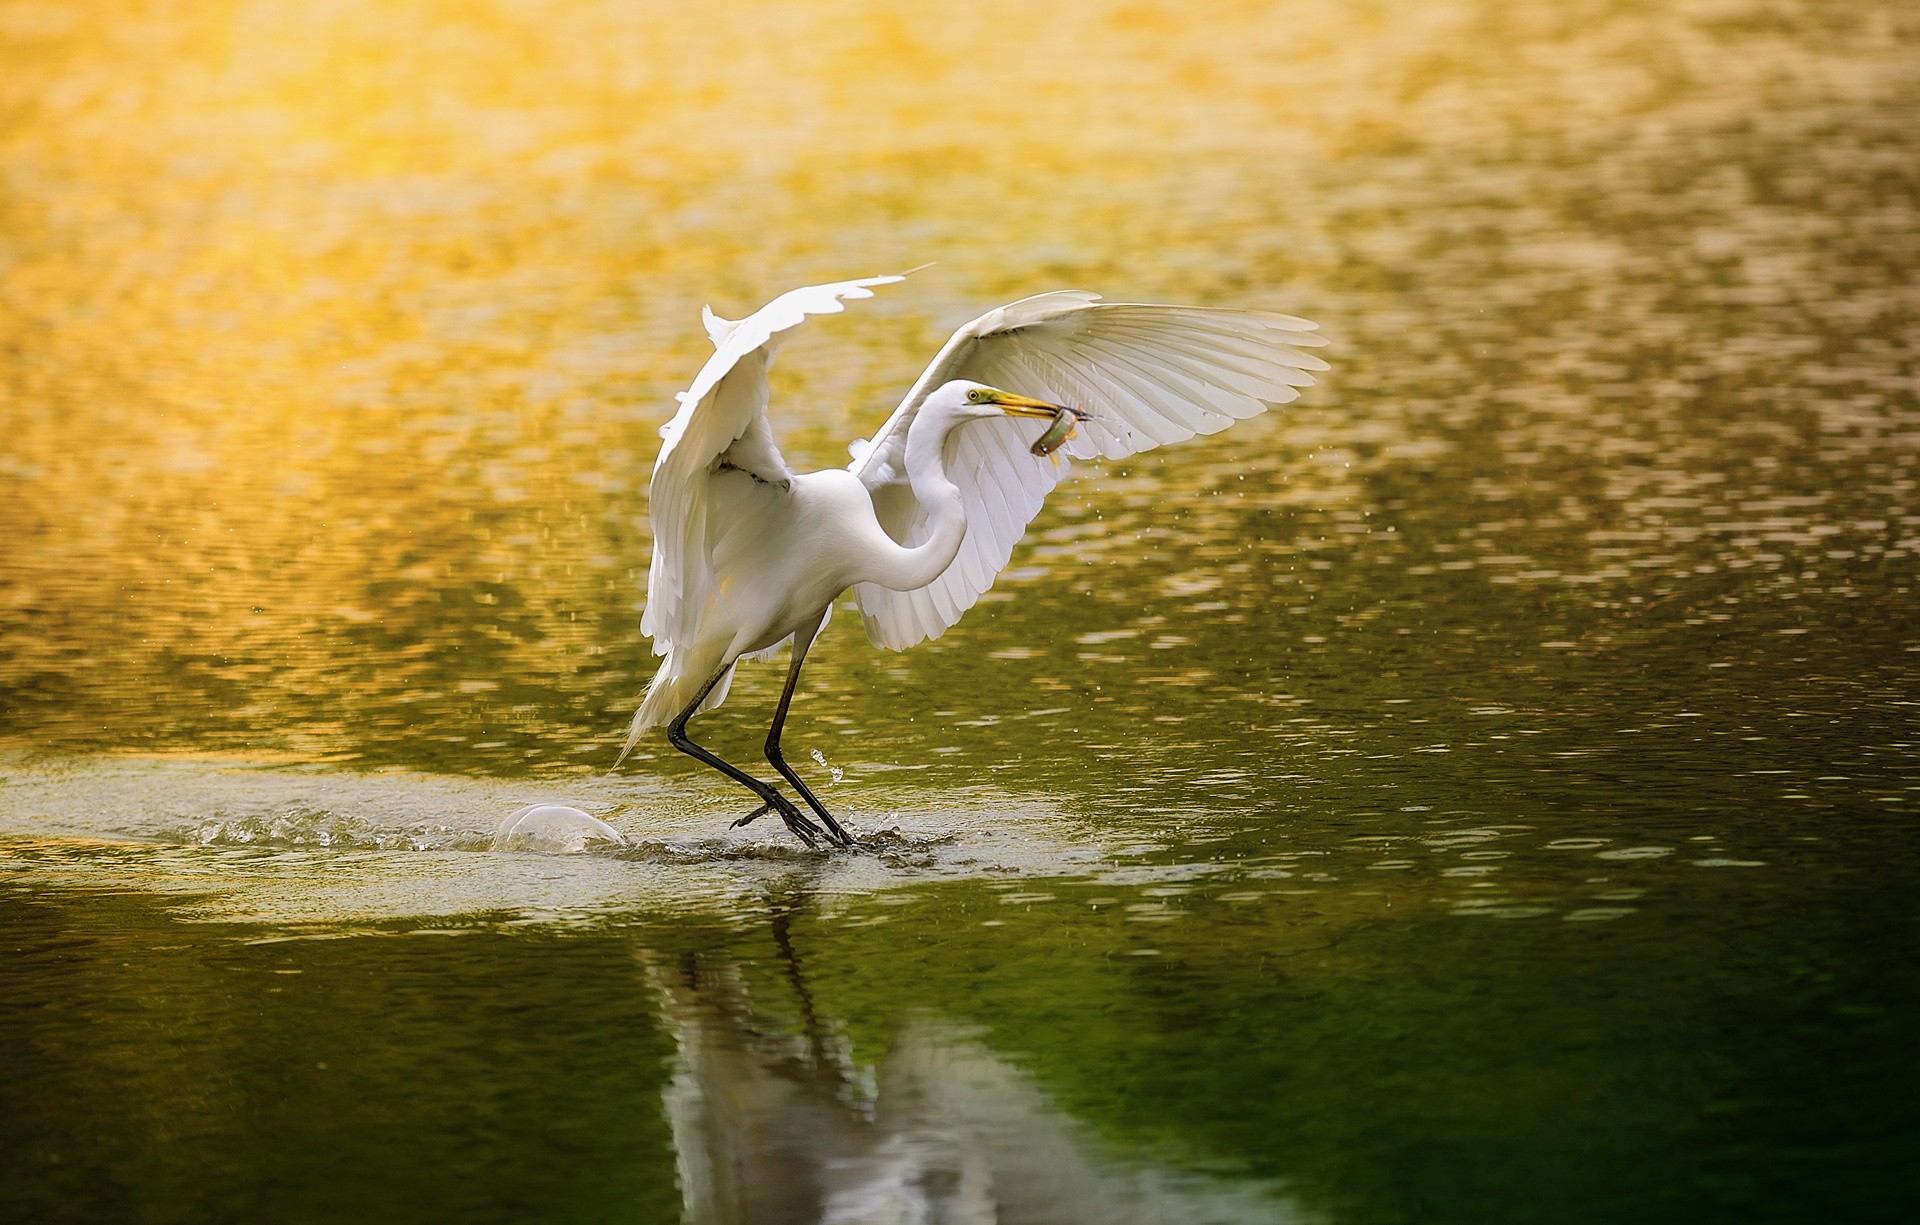 General 1920x1225 animals birds water egret reflection food nature wings outdoors fish